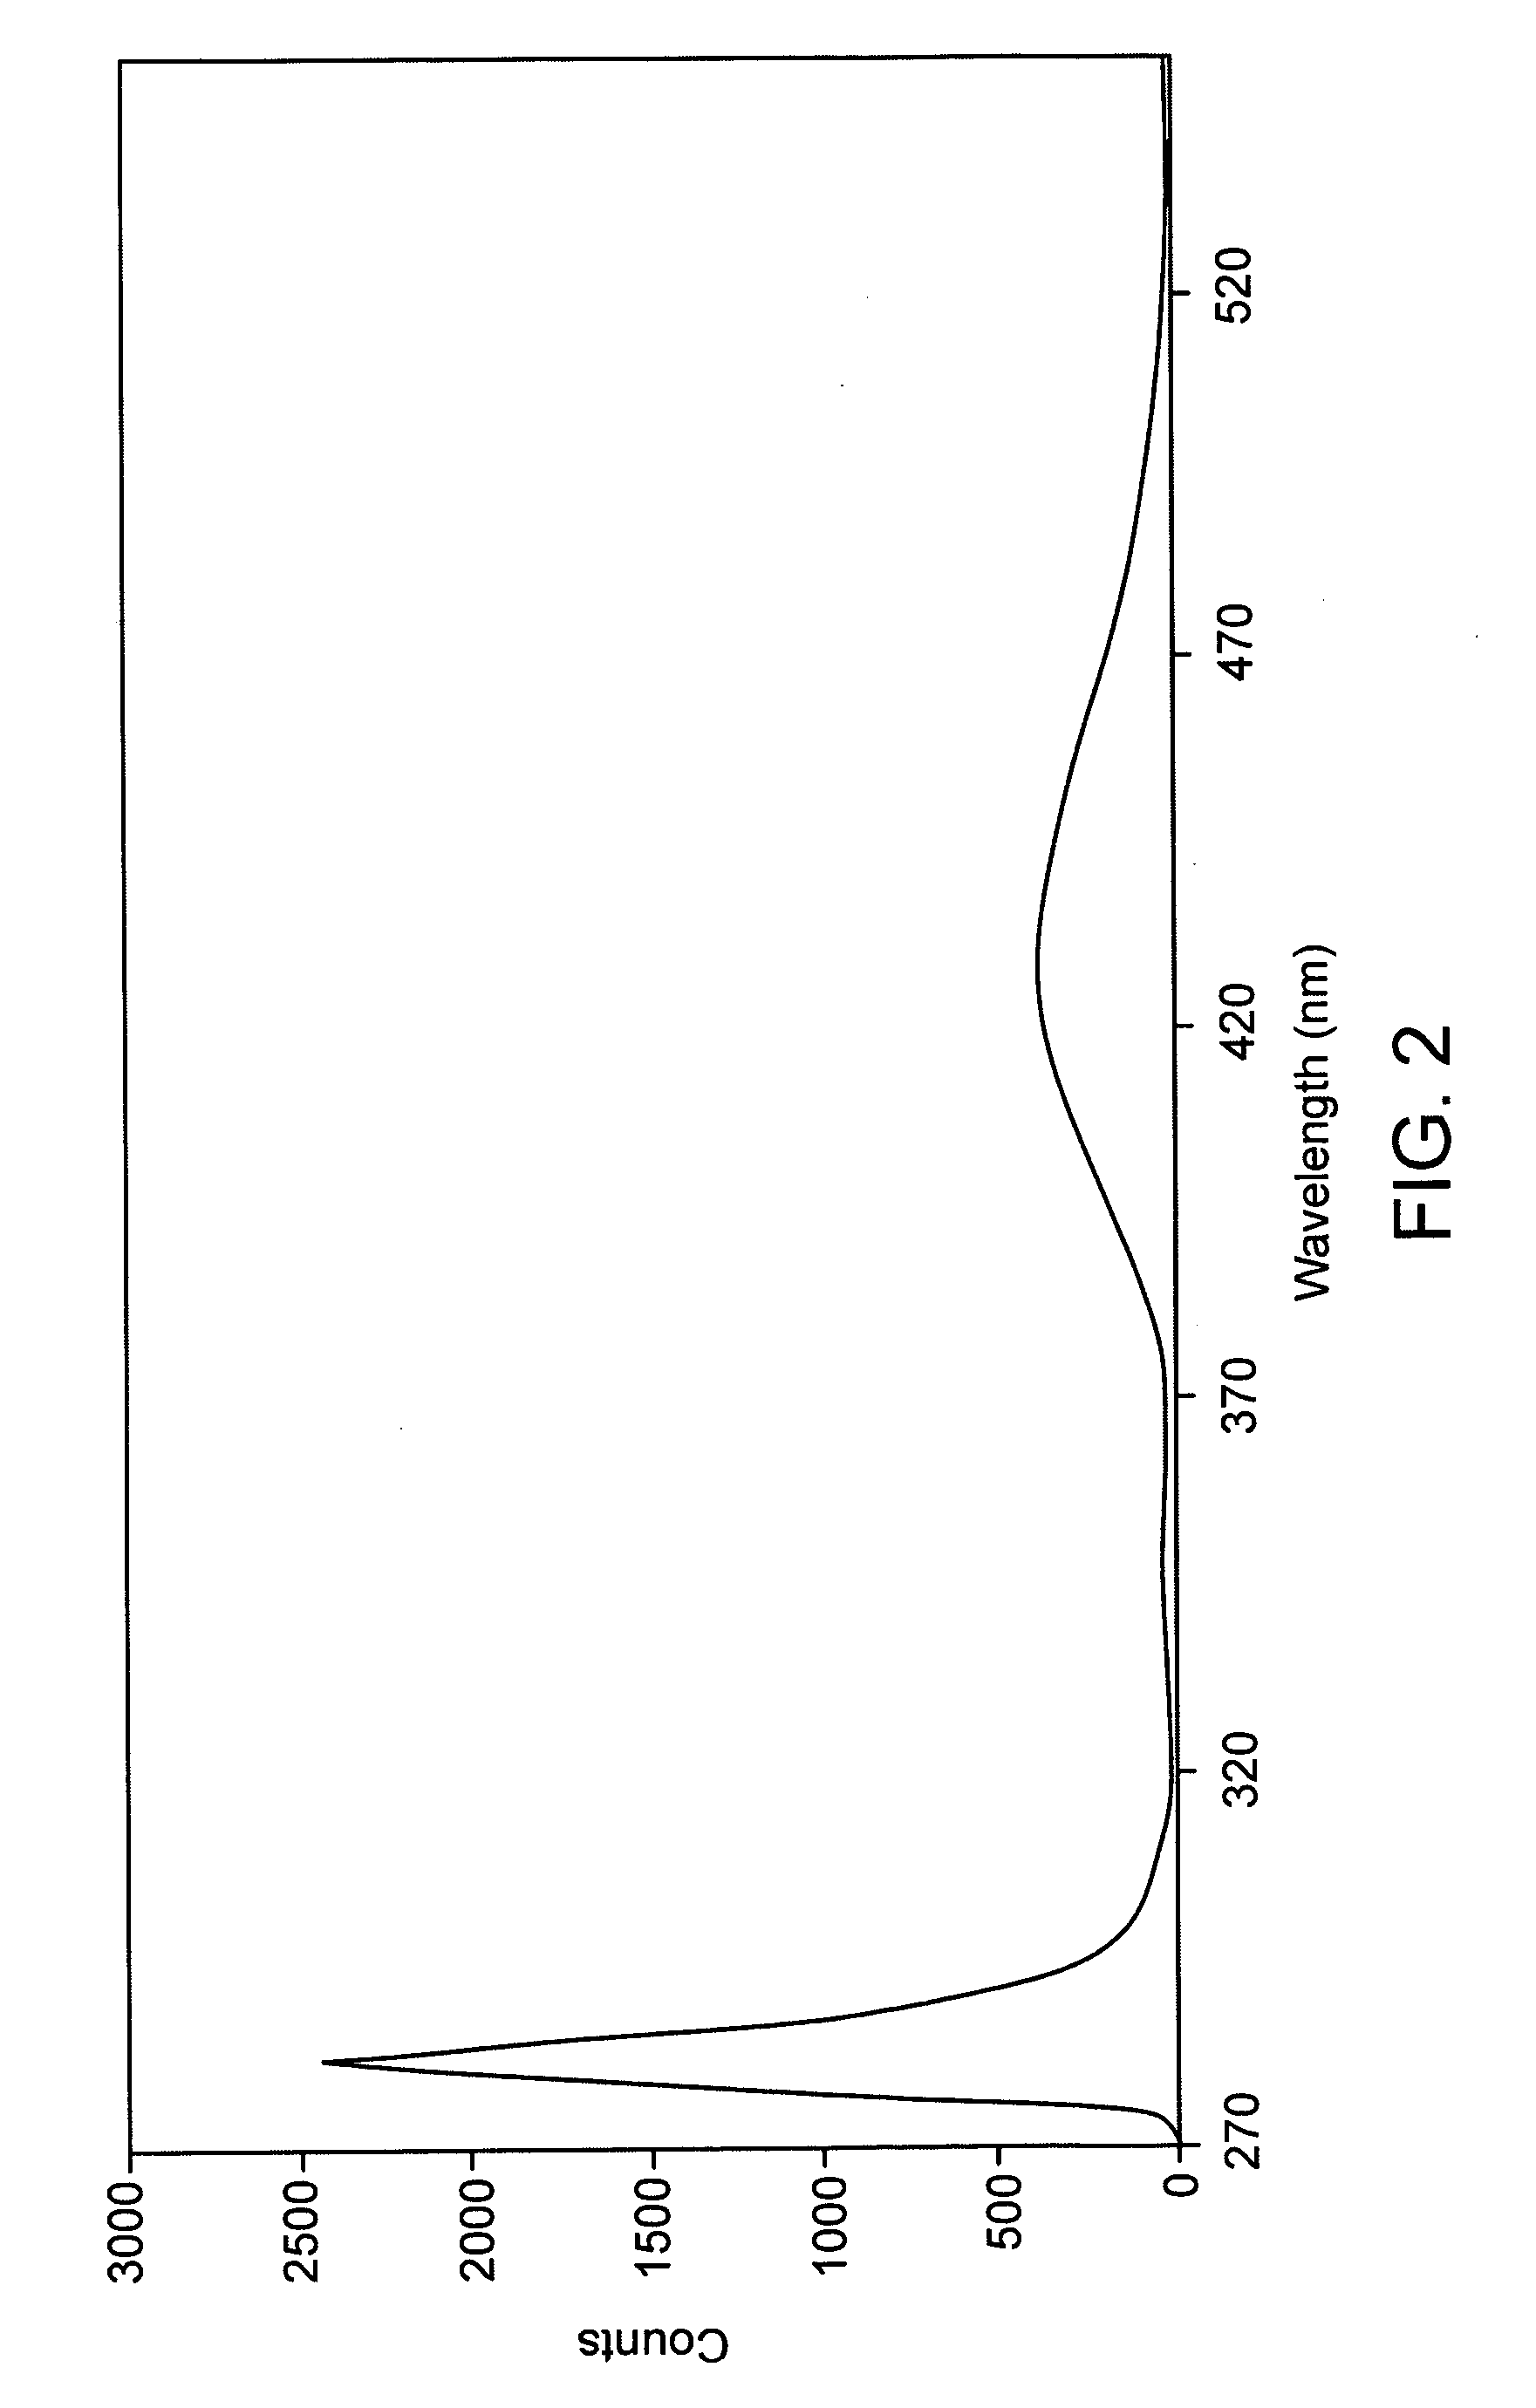 Method for both time and frequency domain protein measurements